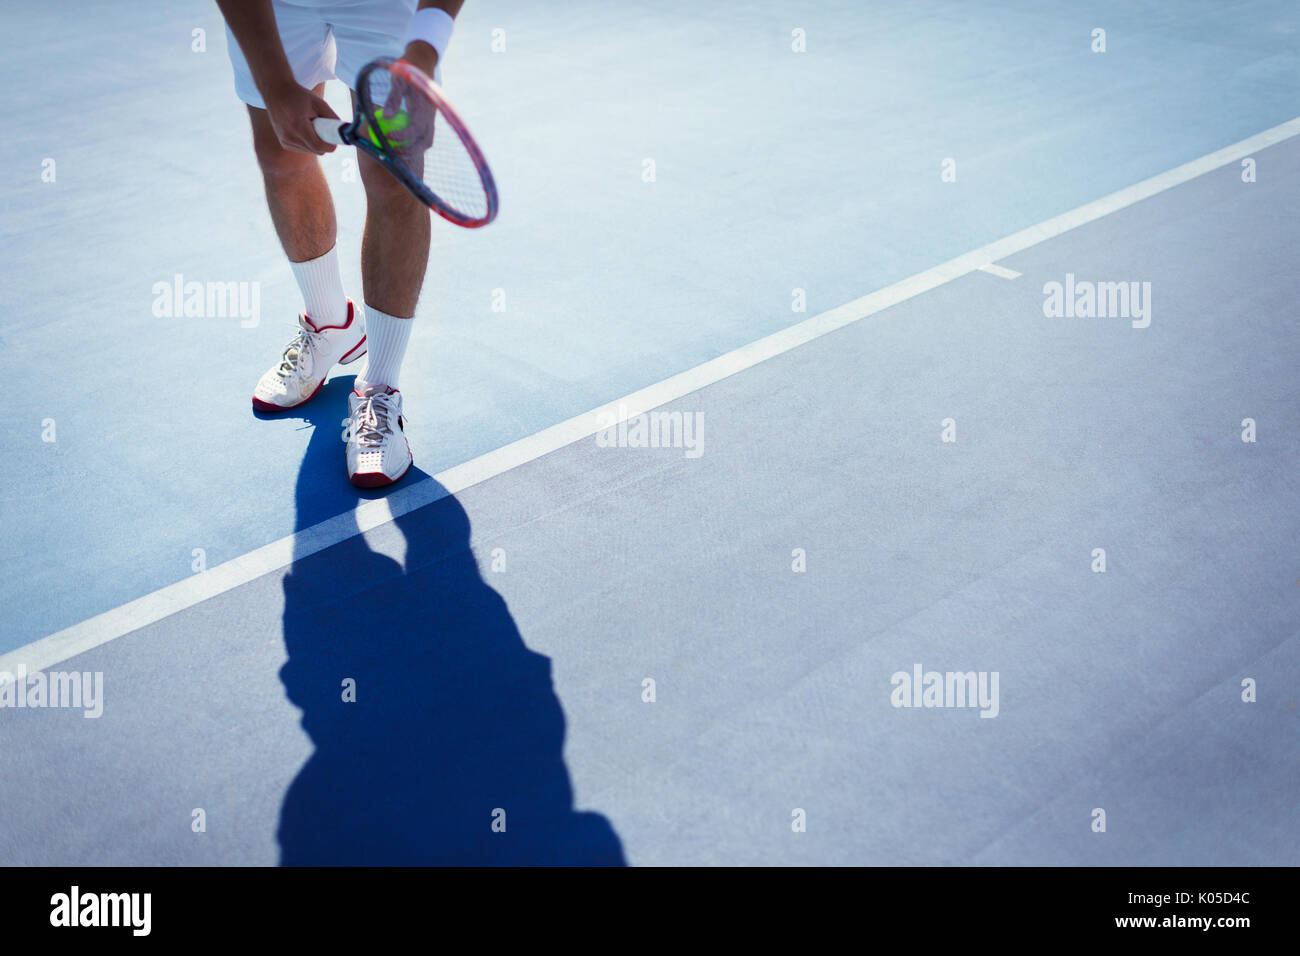 Young male tennis player preparing to serve the ball on sunny blue tennis court Stock Photo